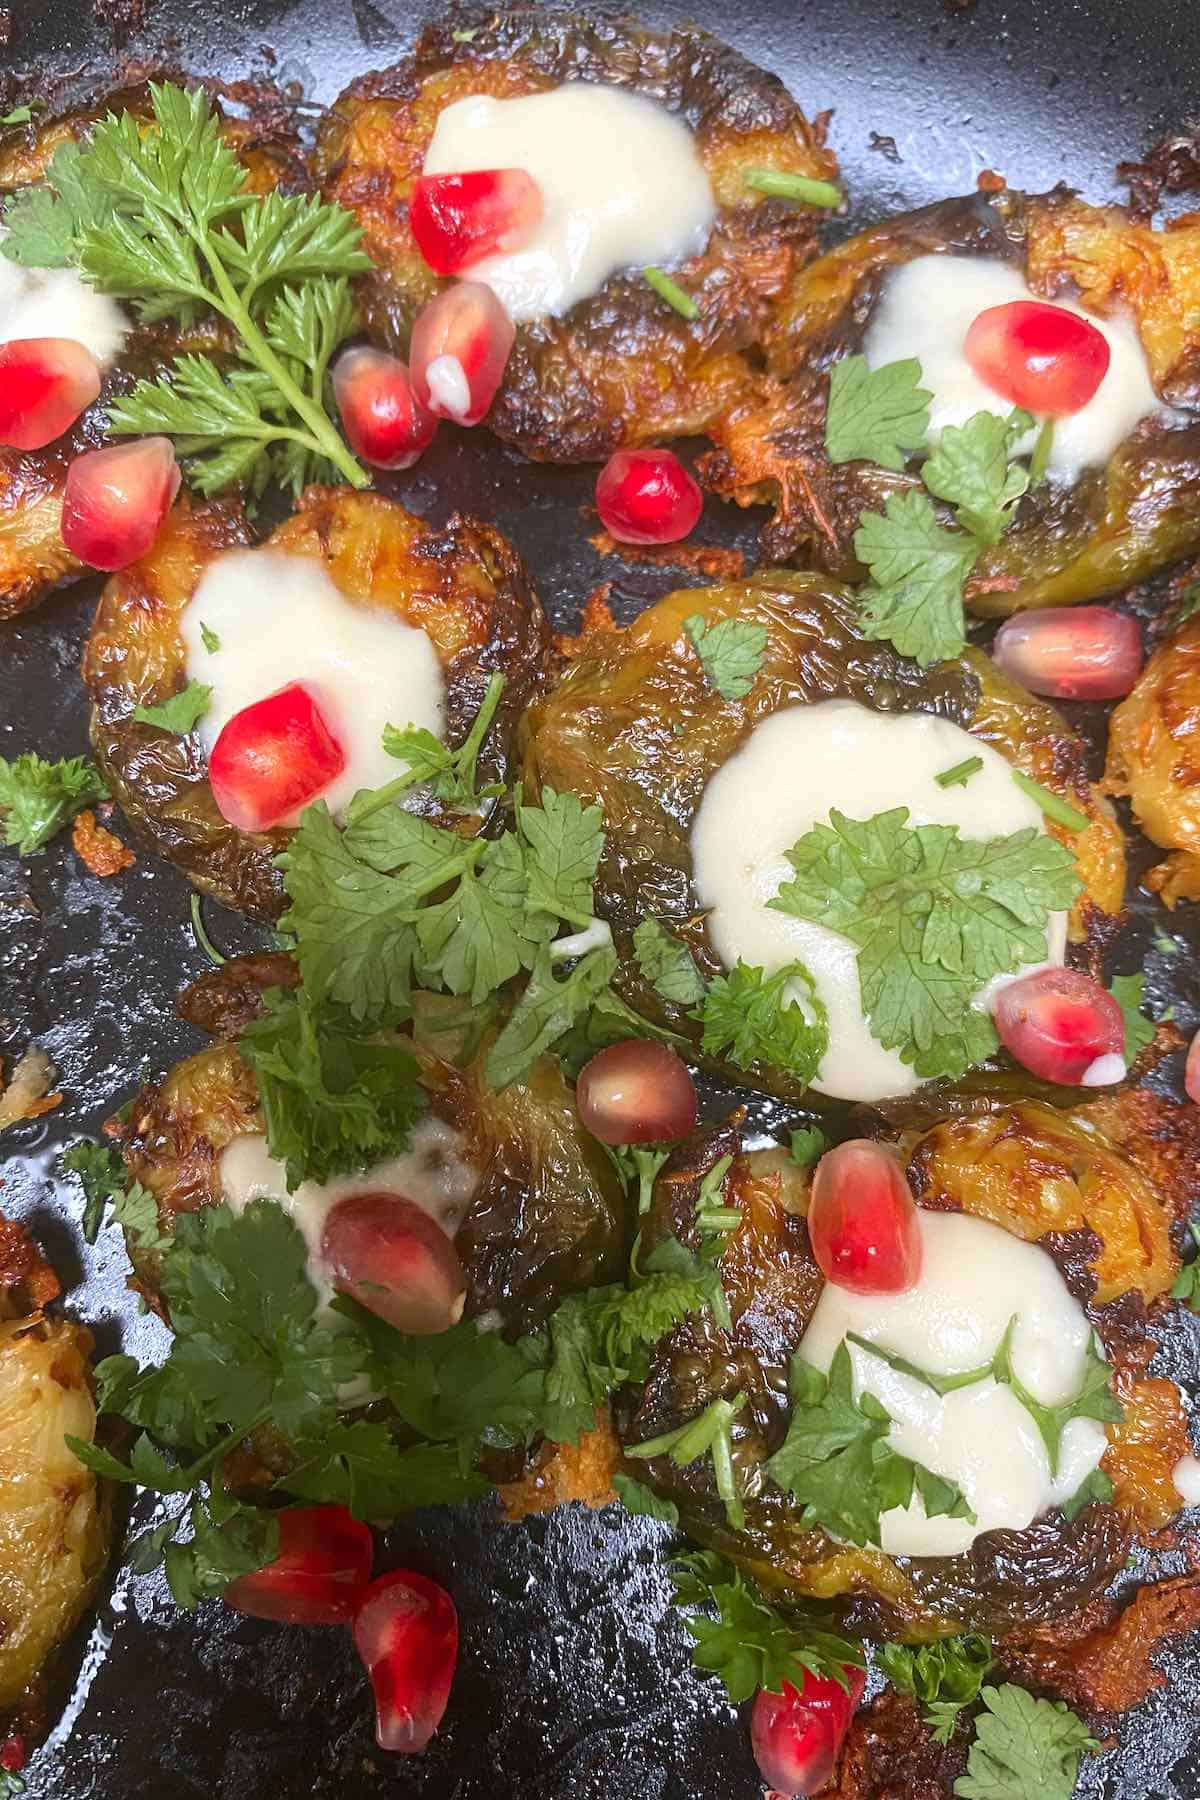 Roasted Brussels sprouts topped with sauce and pomegranate